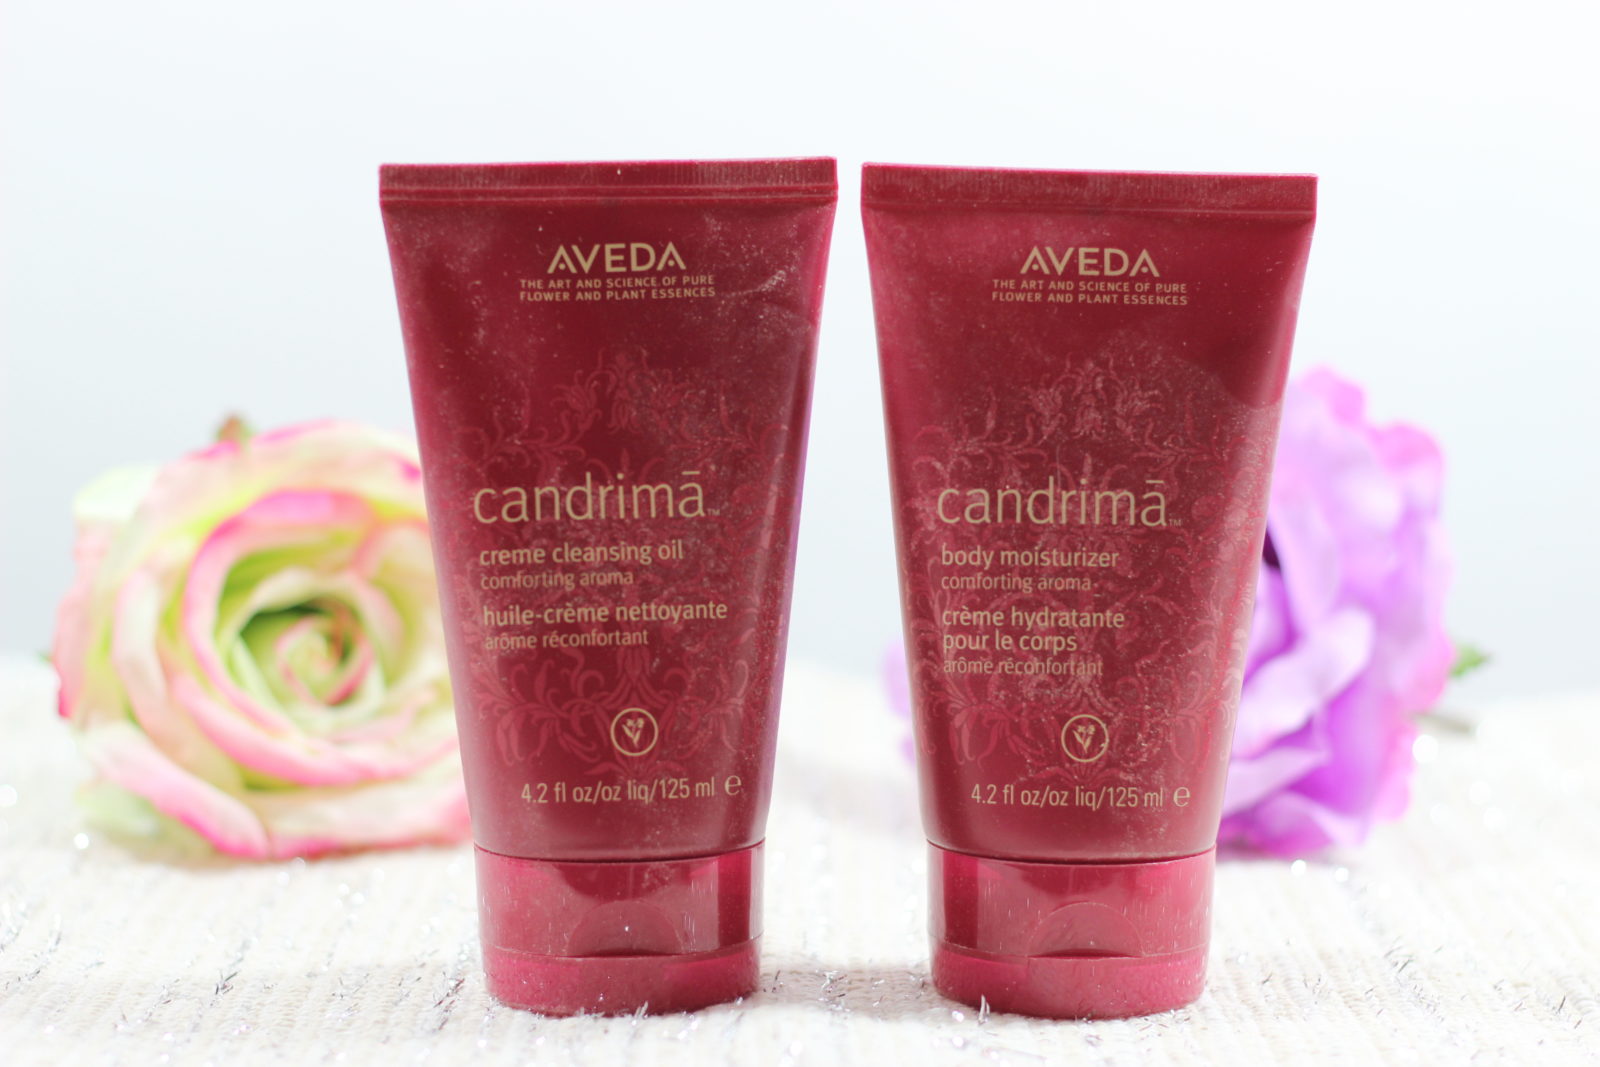 Aveda Candrima Creme Cleansing Oil and Body Moisturizer